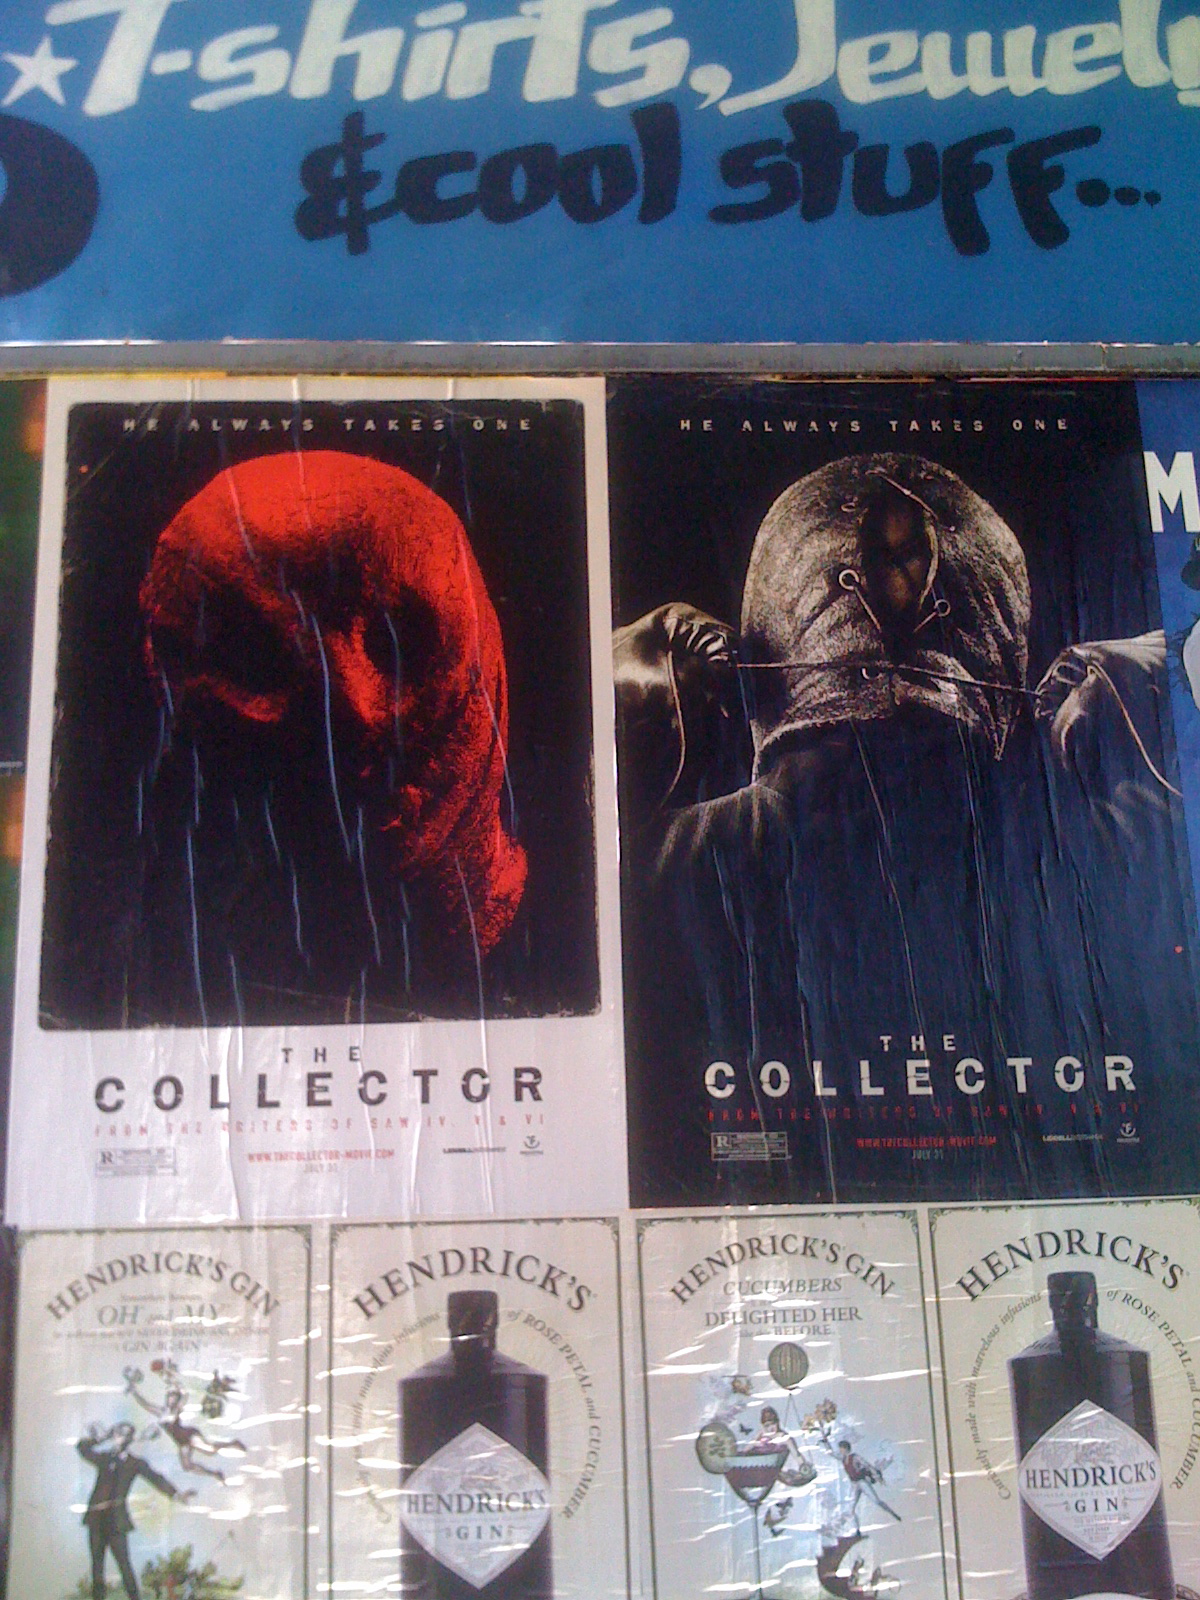 The Collector outdoor posters.